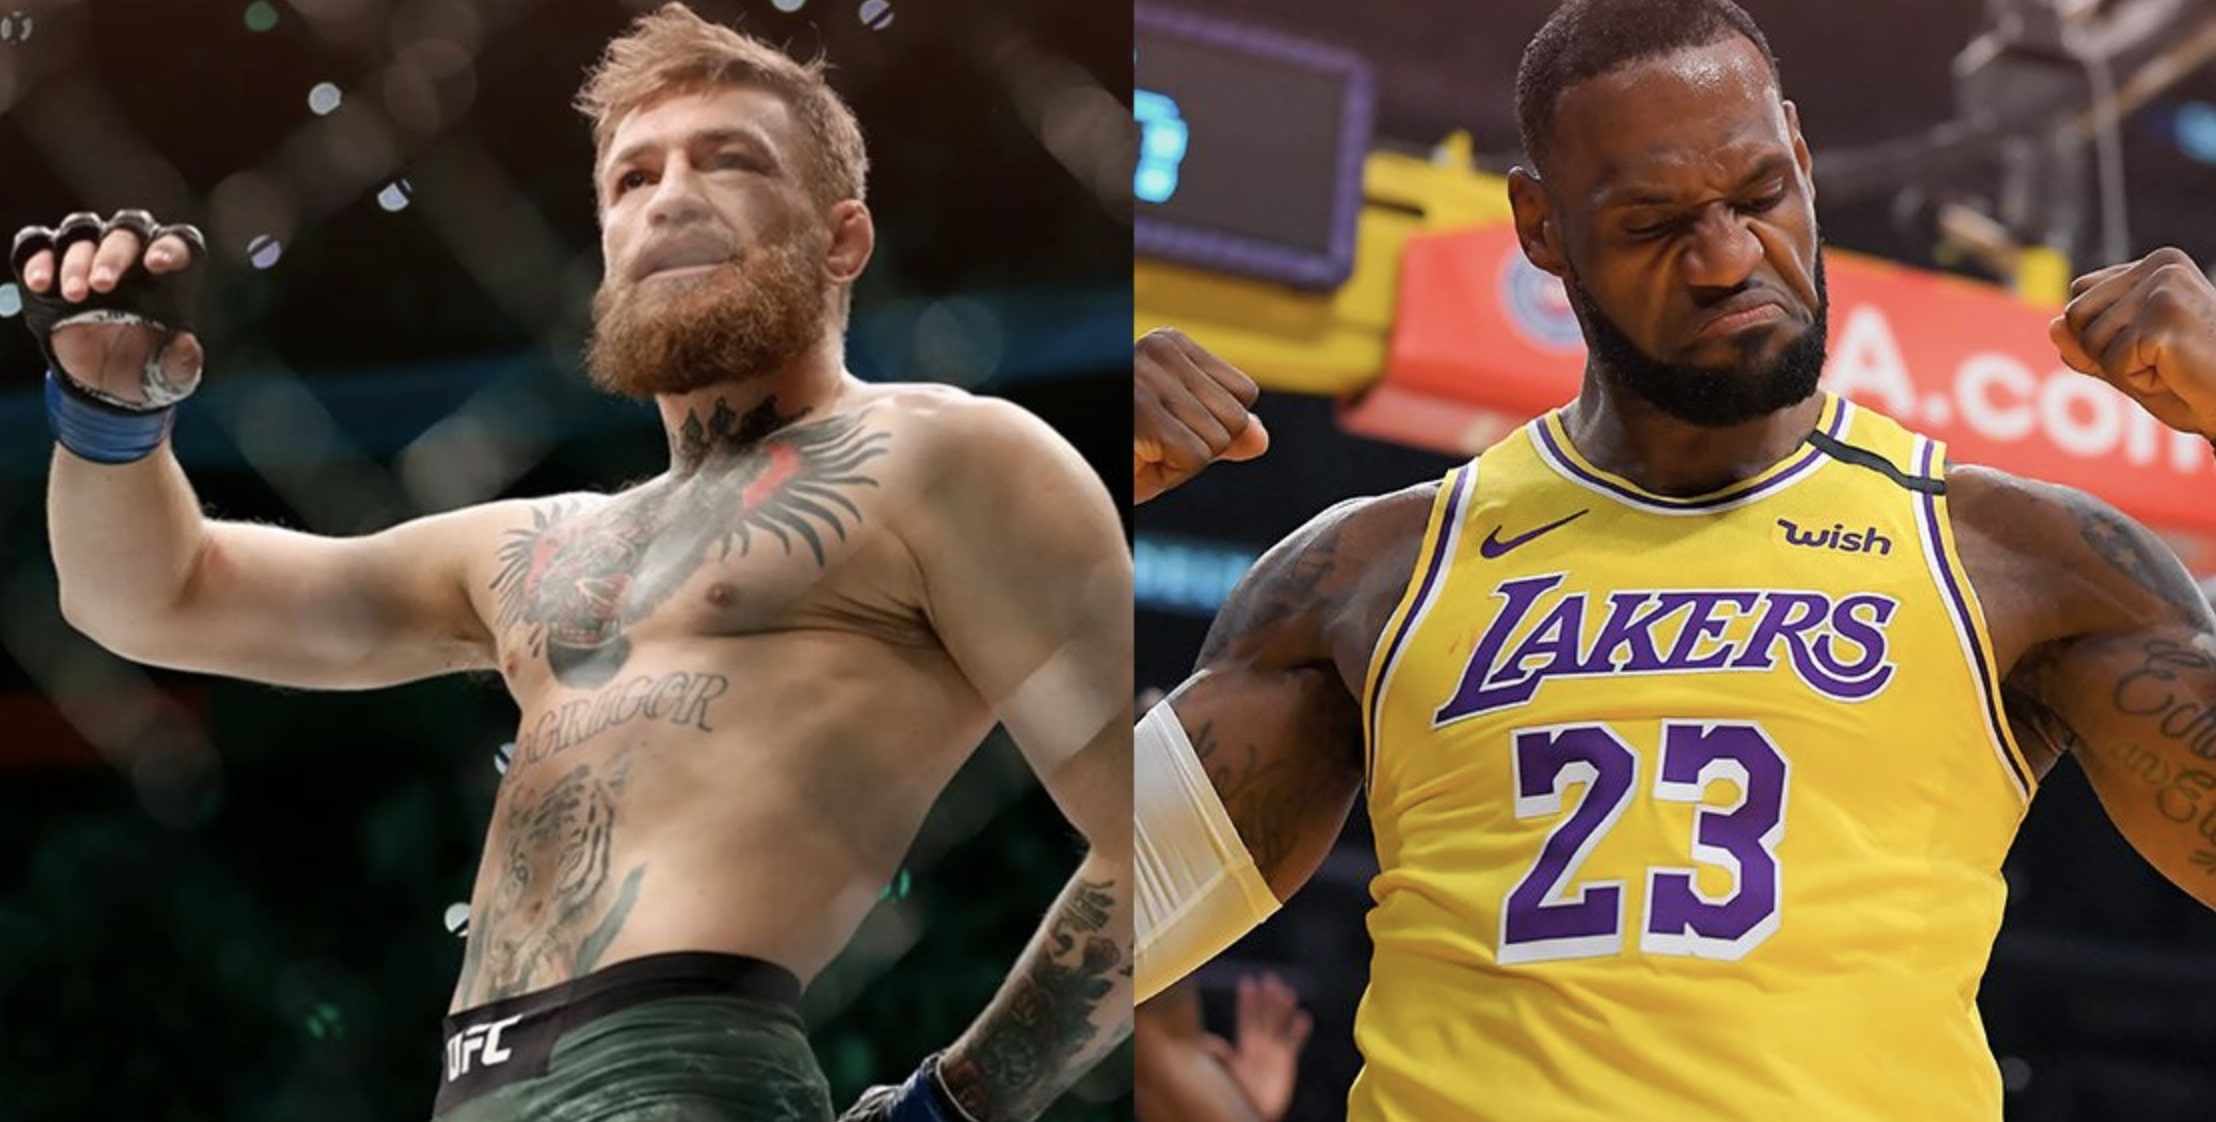 Conor McGregor and LeBron James